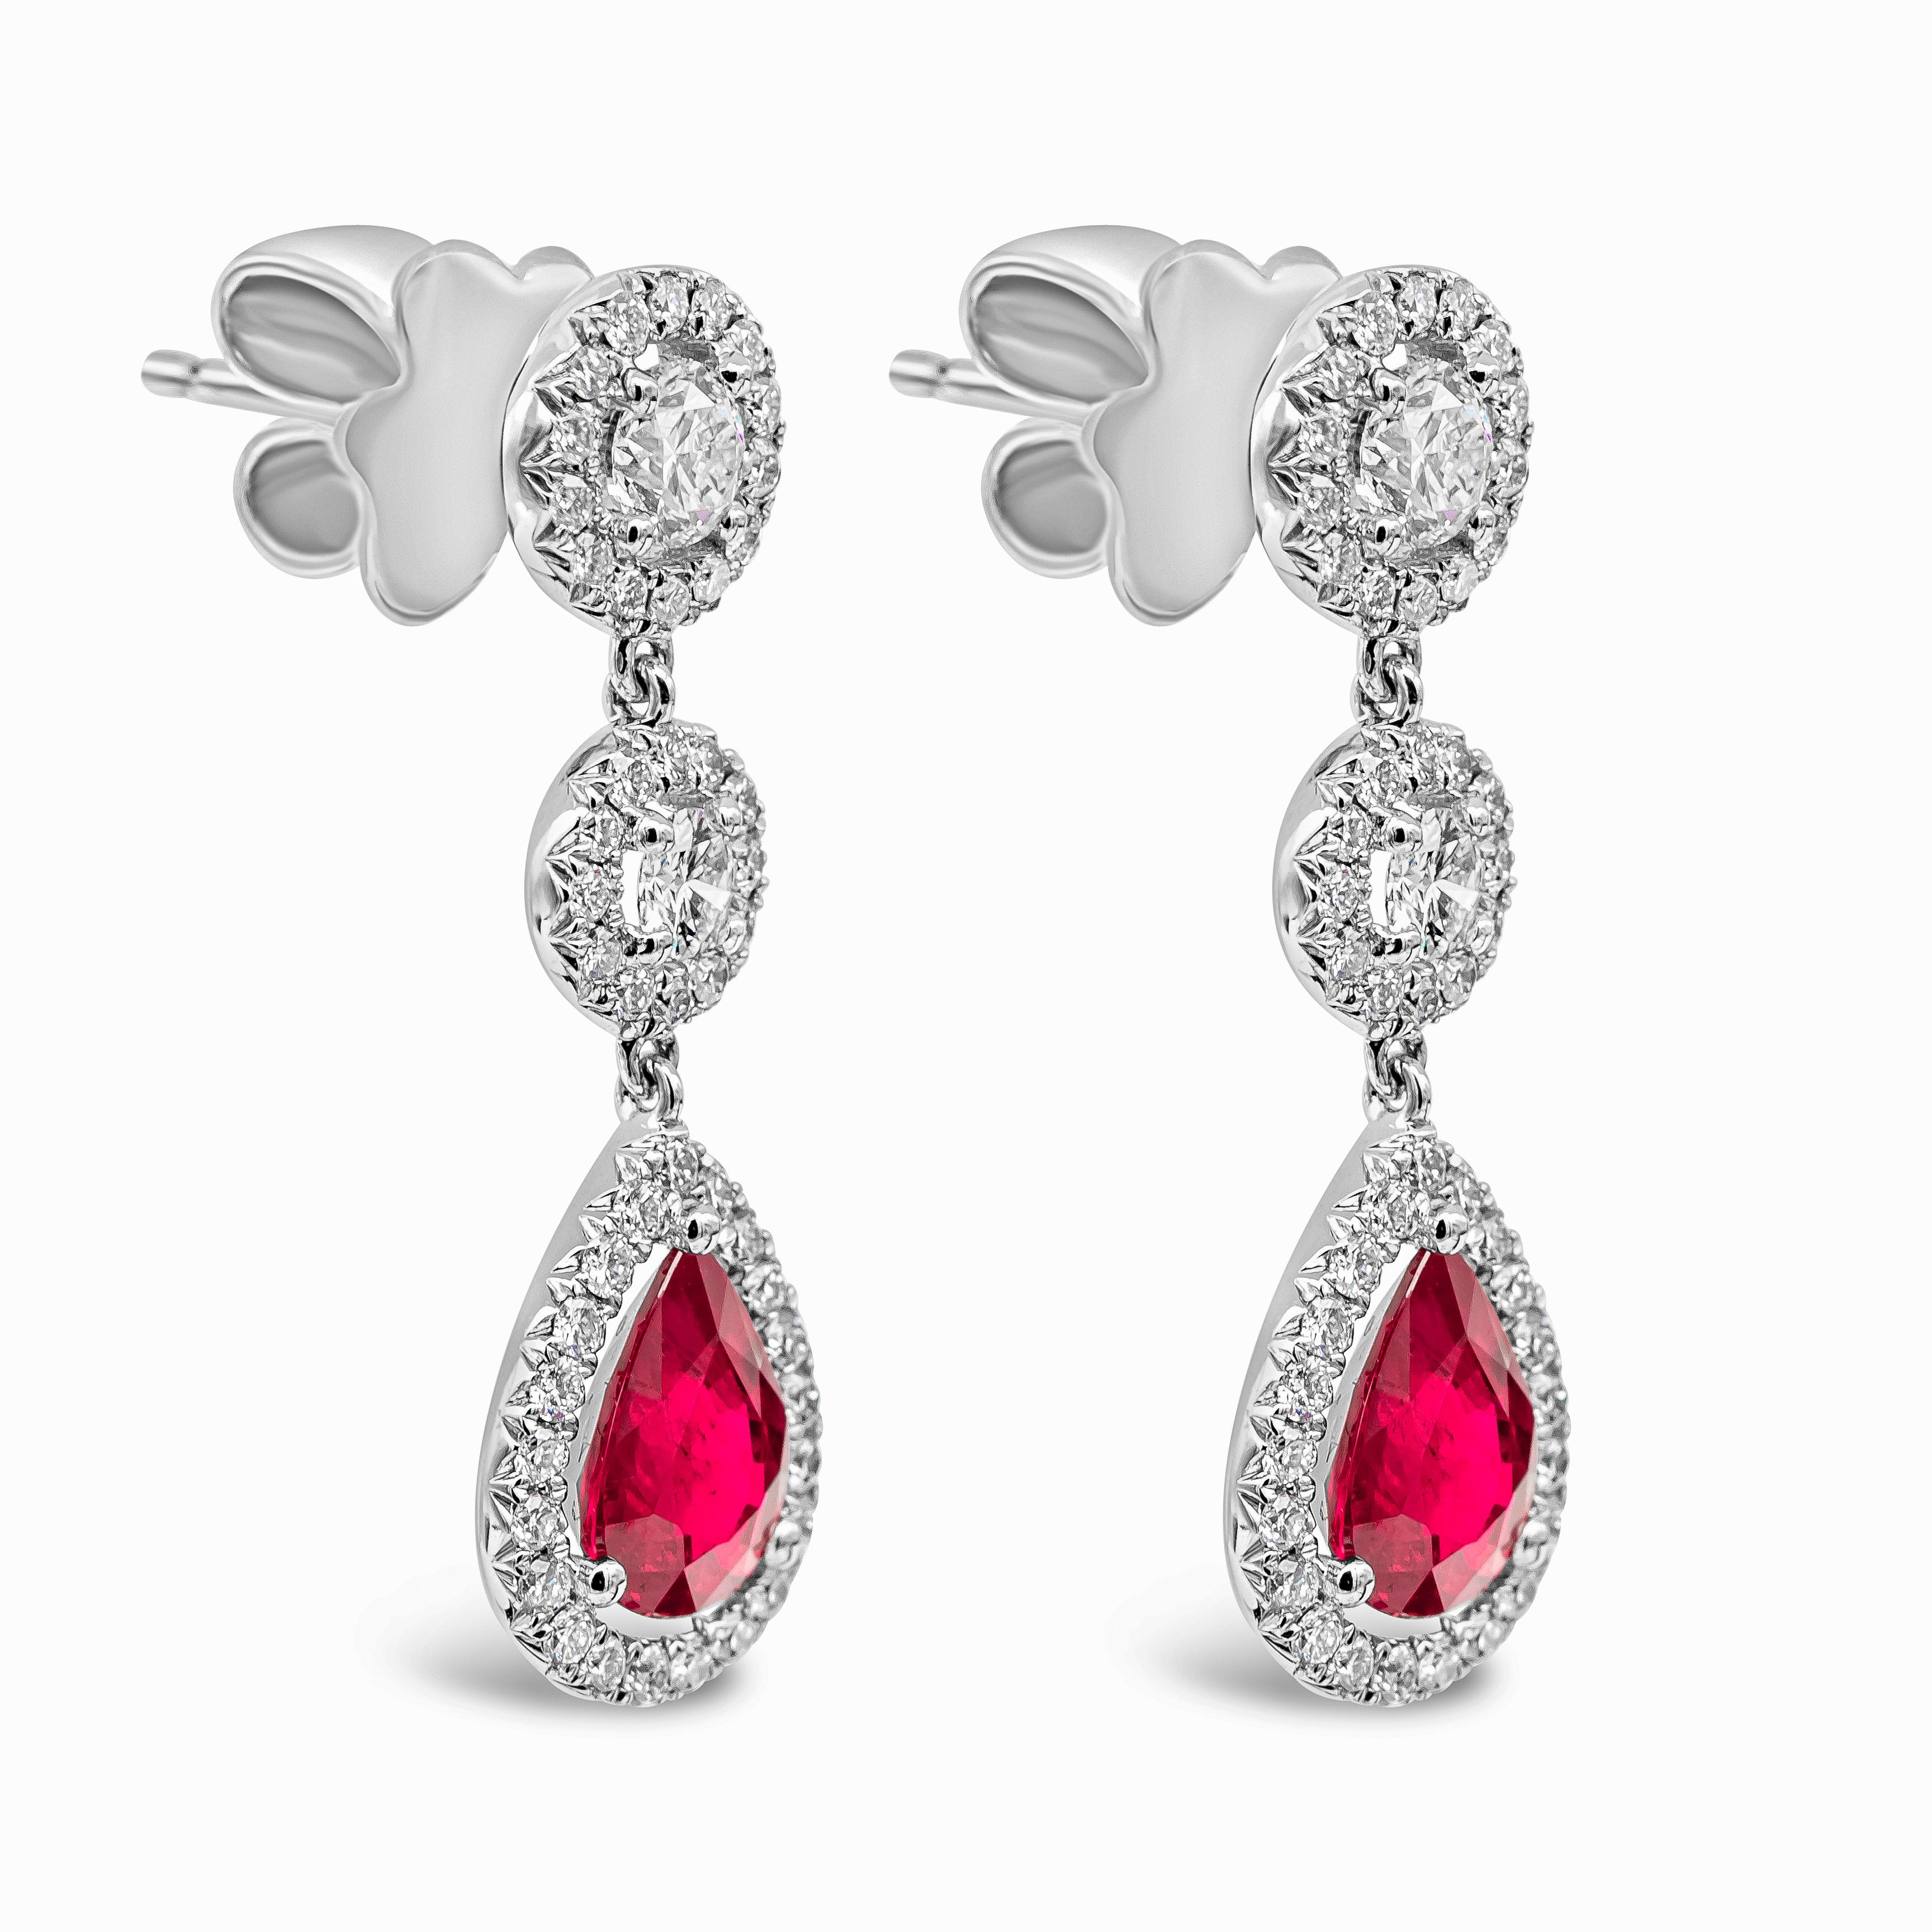 A color-rich pair of dangle earrings showcasing pear shape rubies set in a brilliant diamond halo. Rubies suspended on two diamond halos. Made in 18k white gold. Rubies weigh 2.25 carats total; diamonds weigh 1.13 carats total.

Style available in